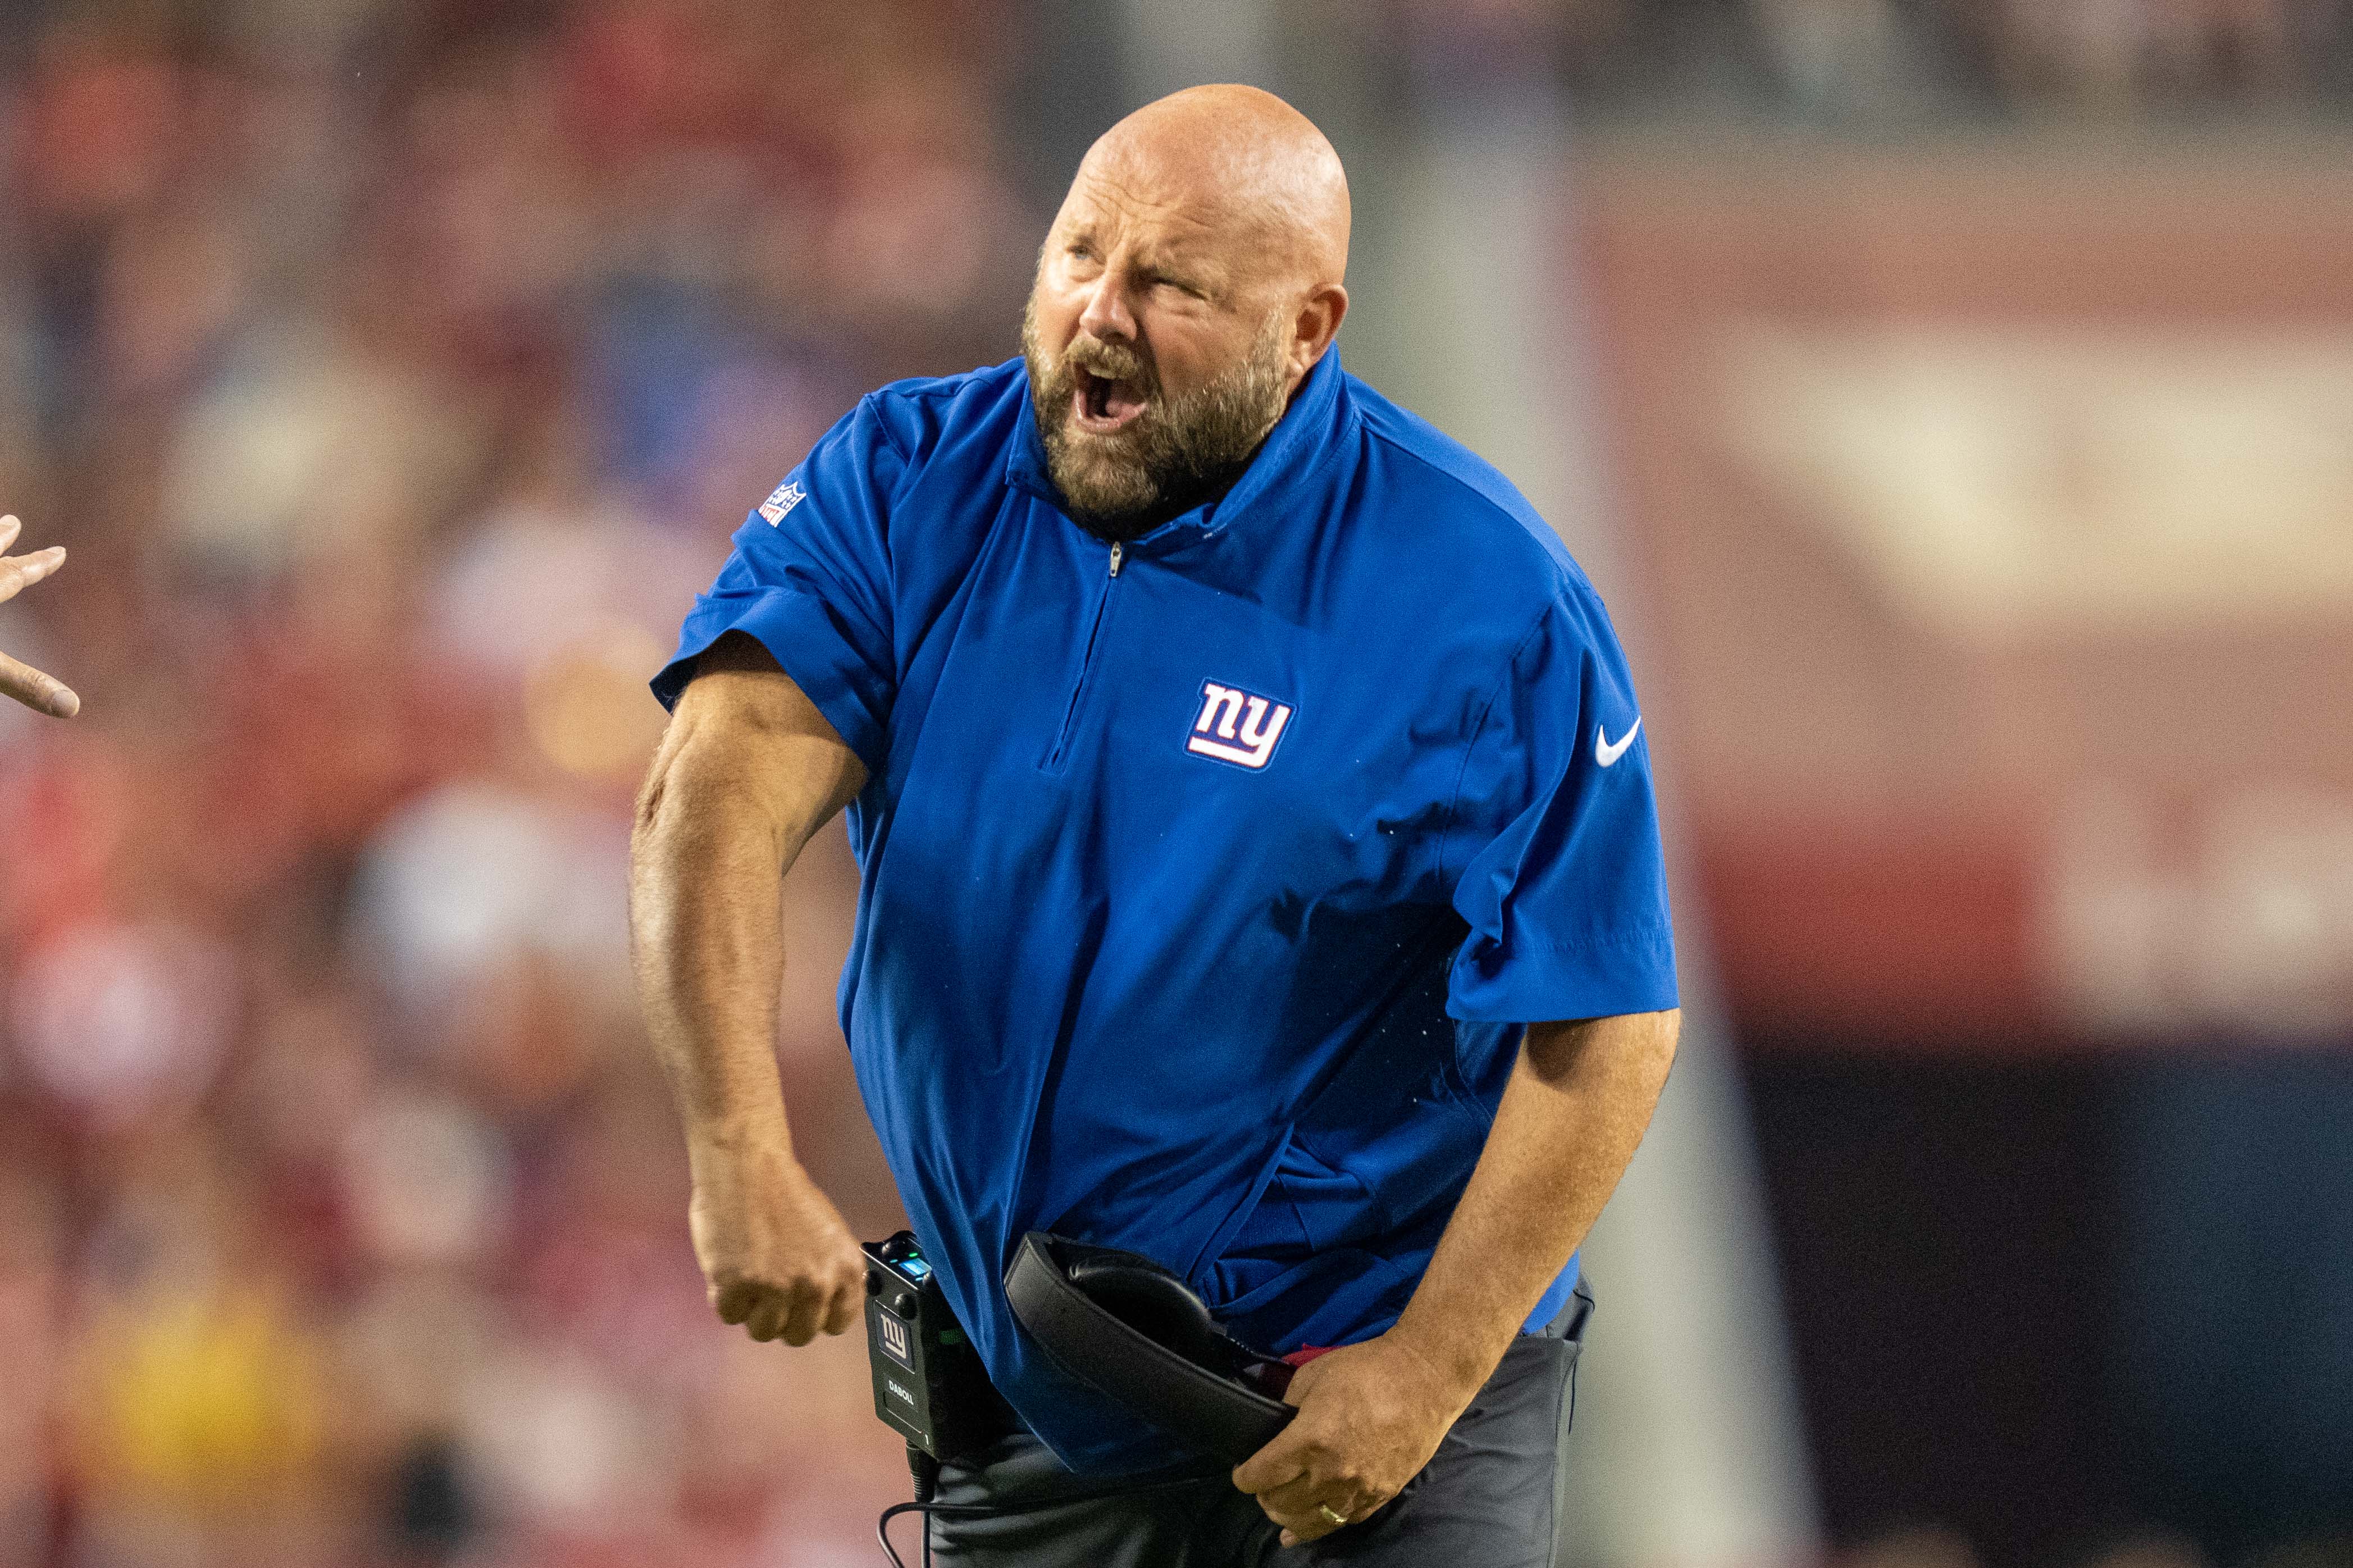 New York Giants head coach Brian Daboll argues with a referee during the third quarter against the San Francisco 49ers at Levi's Stadium